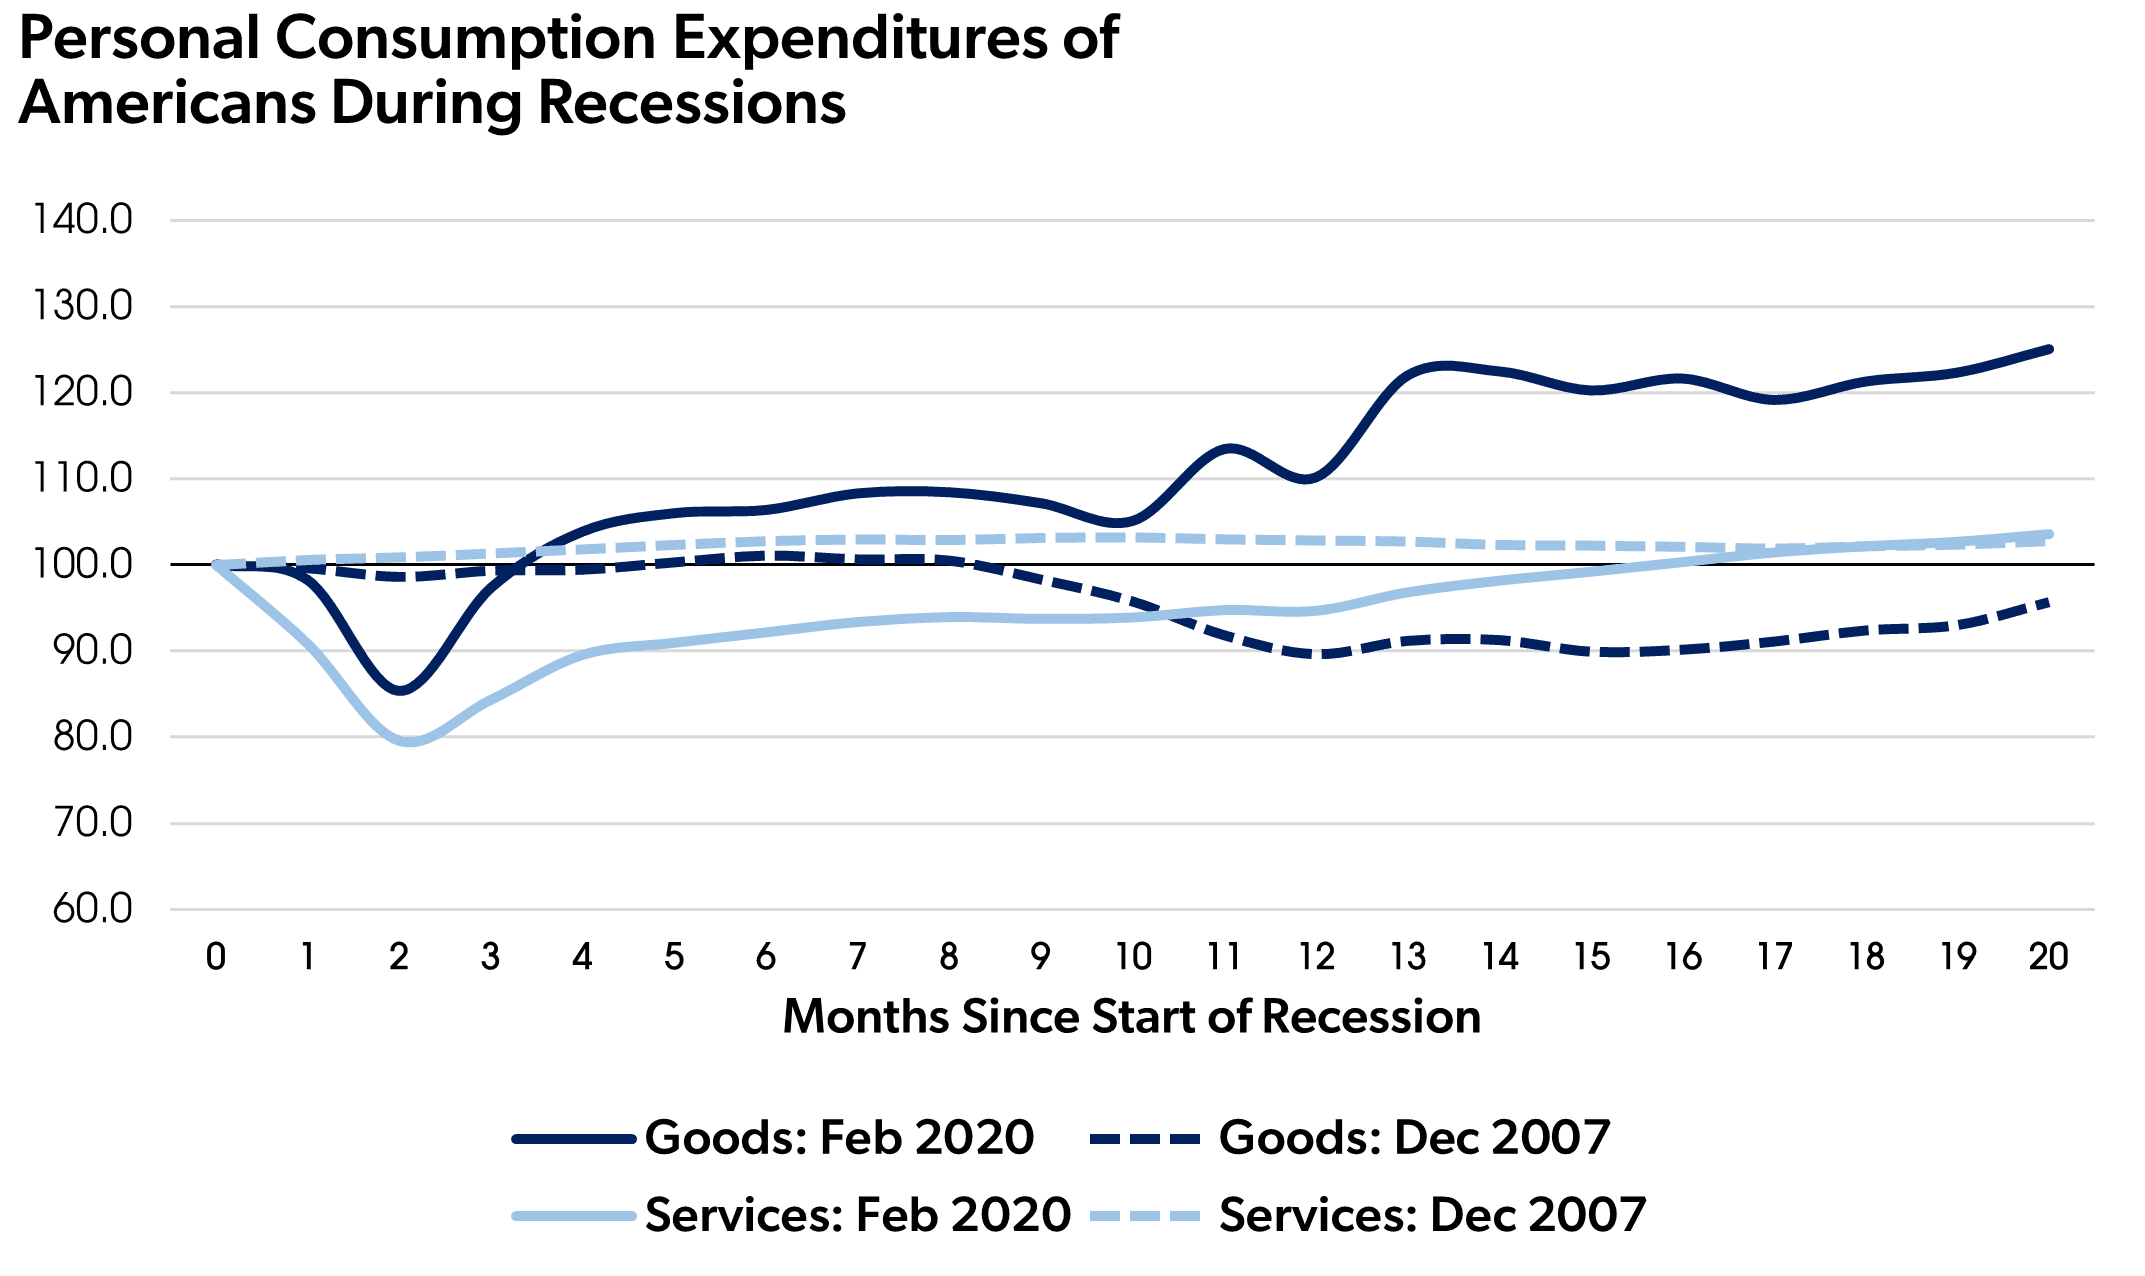 Chart of personal consumption expenditures of Americans during recessions, December 2007 vs February 2020